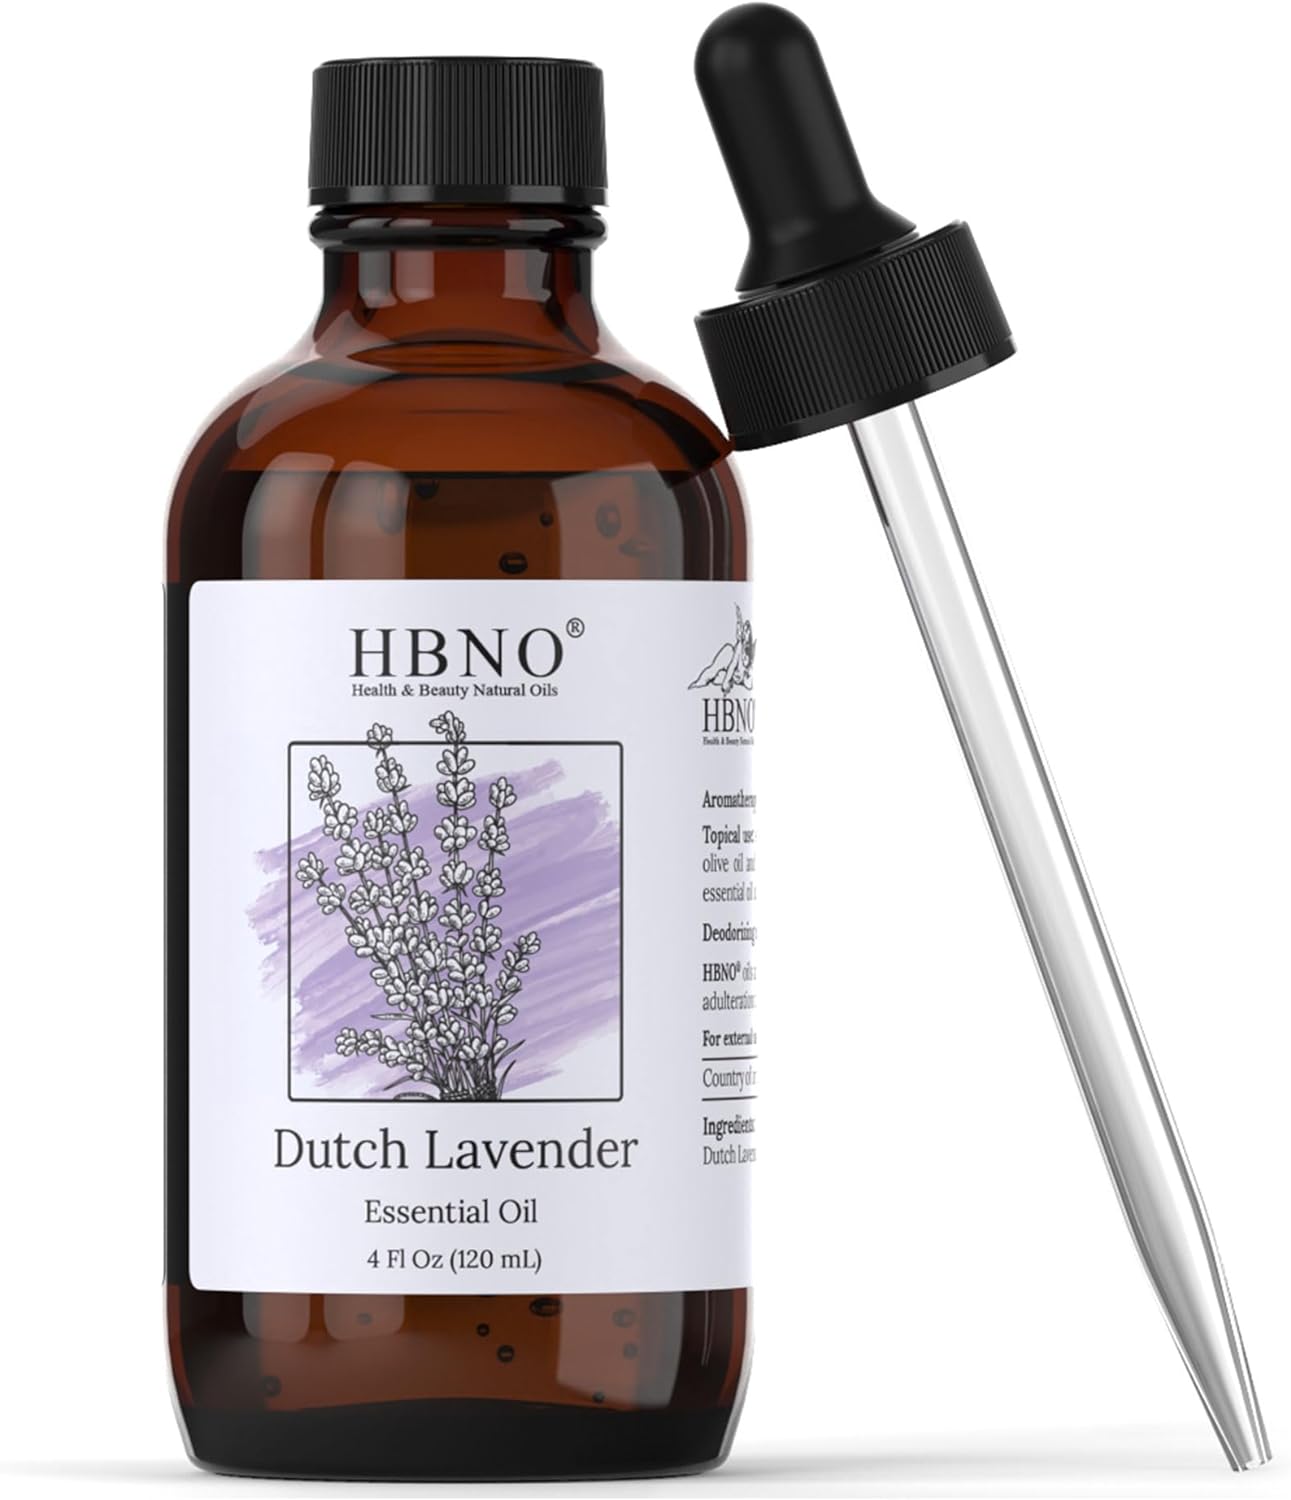 I recently incorporated the HBNO Lemon Essential Oil into my DIY cleaning supplies, and the vibrant freshness and value size have made it an absolute essential in my cleaning routine. Here' why it deserves a glowing 5-star review:**Pros:****1. Generous 4 oz Value Size:**The ample 4 oz (120ml) size of HBNO Lemon Essential Oil is a game-changer, providing a substantial quantity for various DIY cleaning projects. It ensures that I always have a fresh supply on hand without the need for frequent re